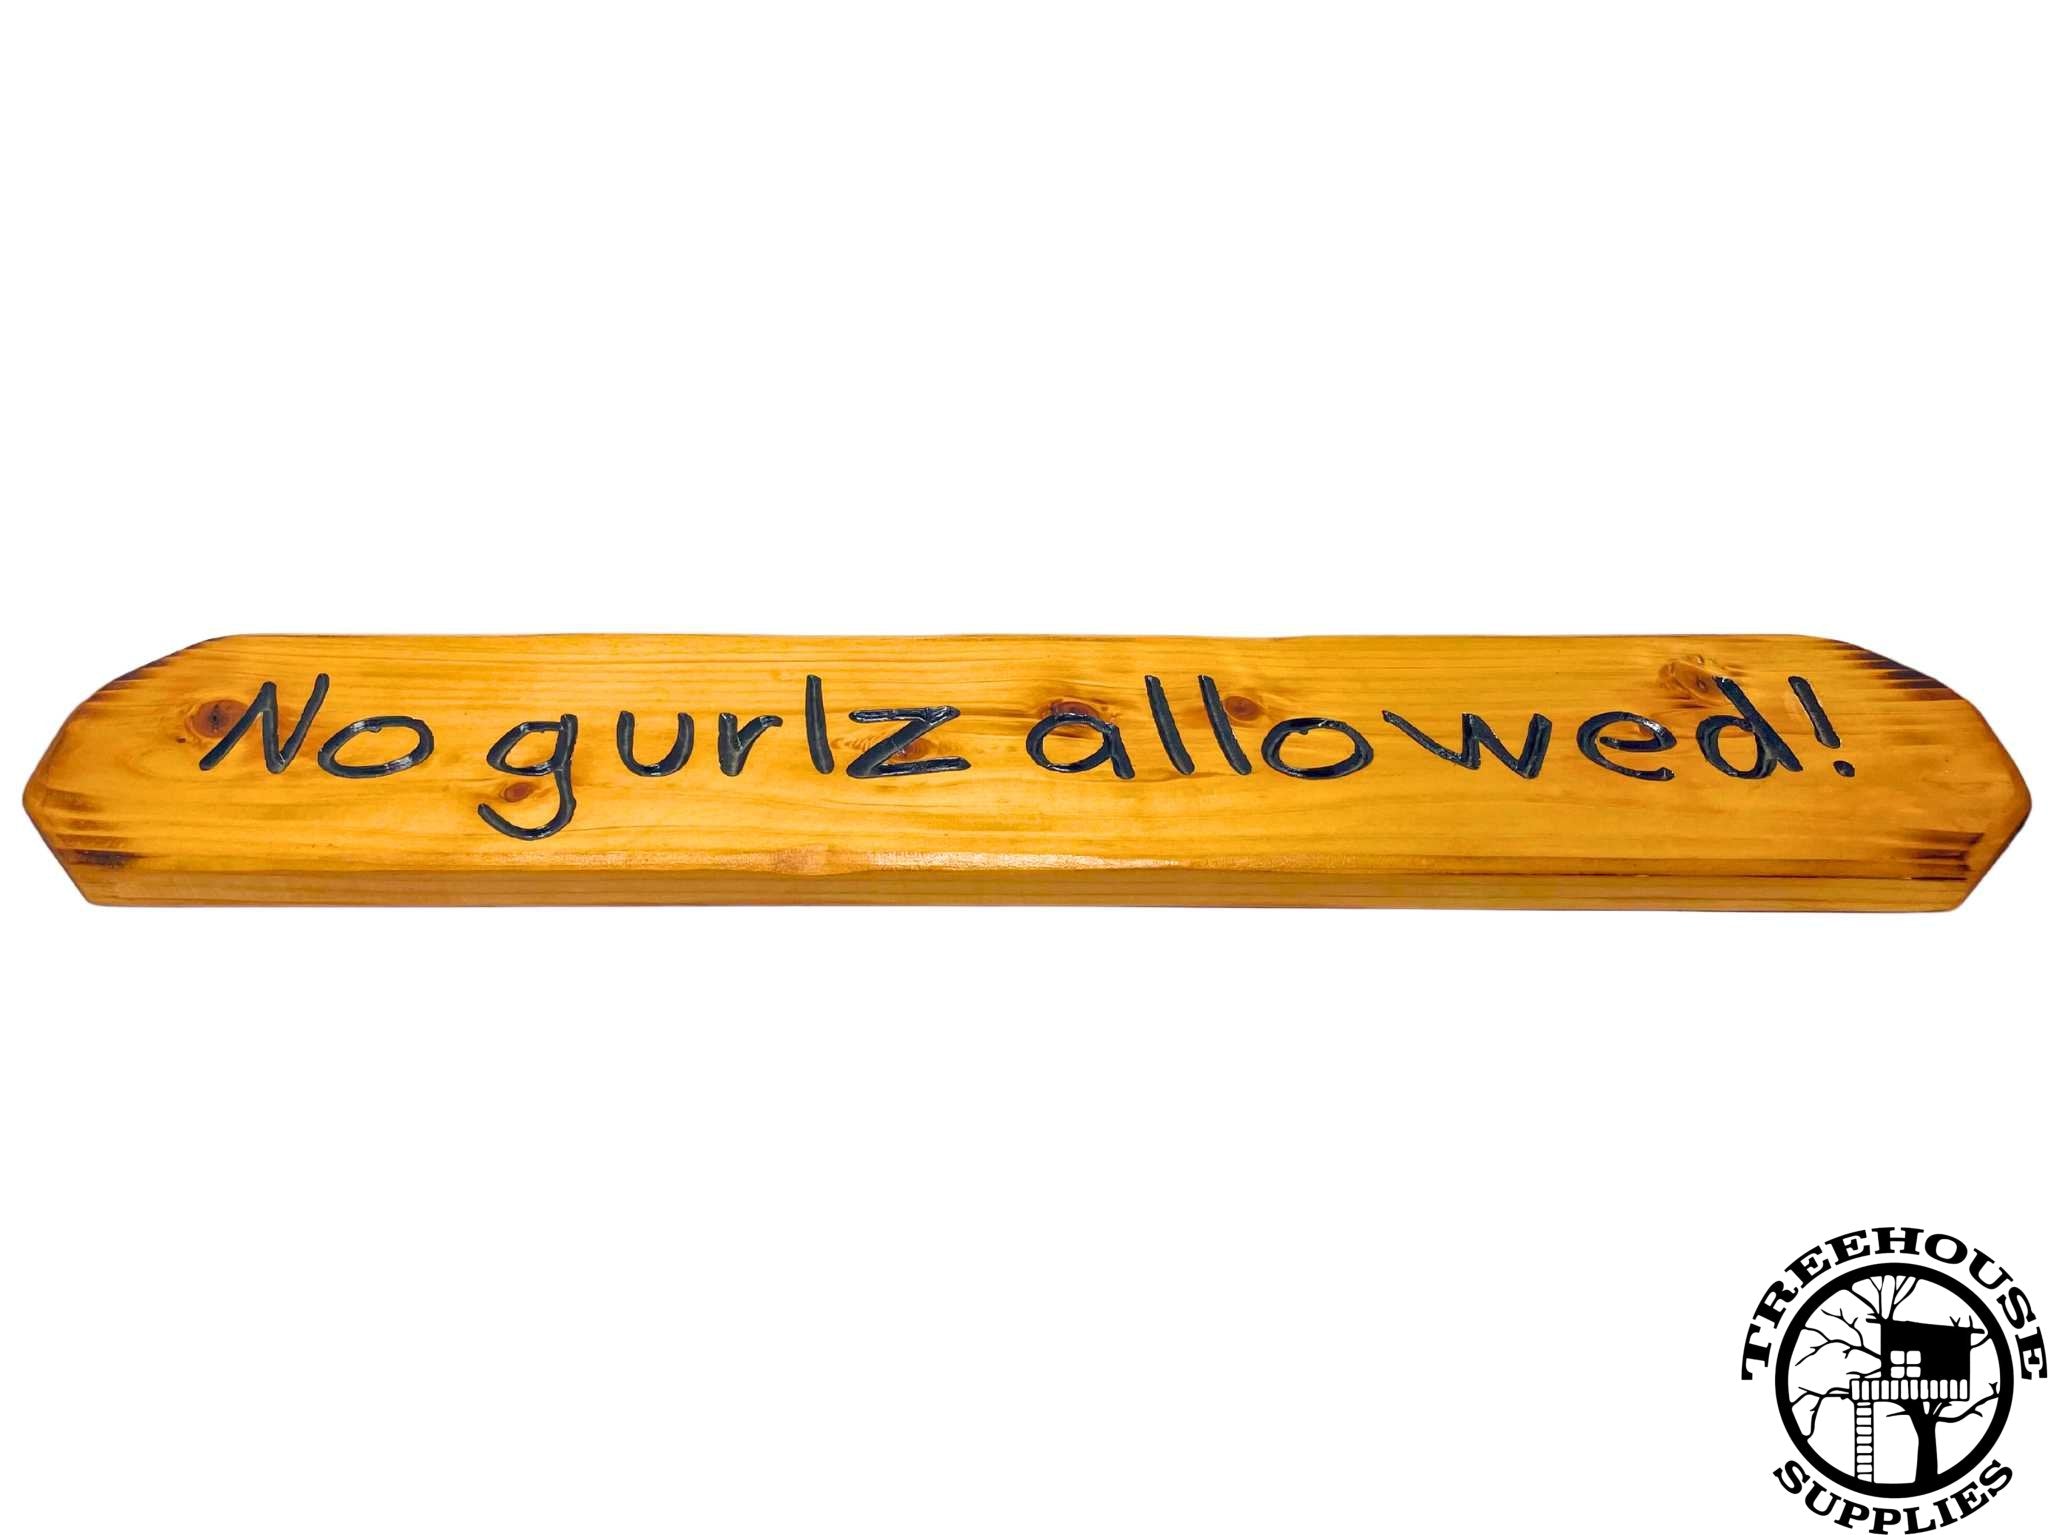 Two-foot-long wooden sign with lettering. Engraved or carved text states No Gurls Allowed! White Background. Side view.